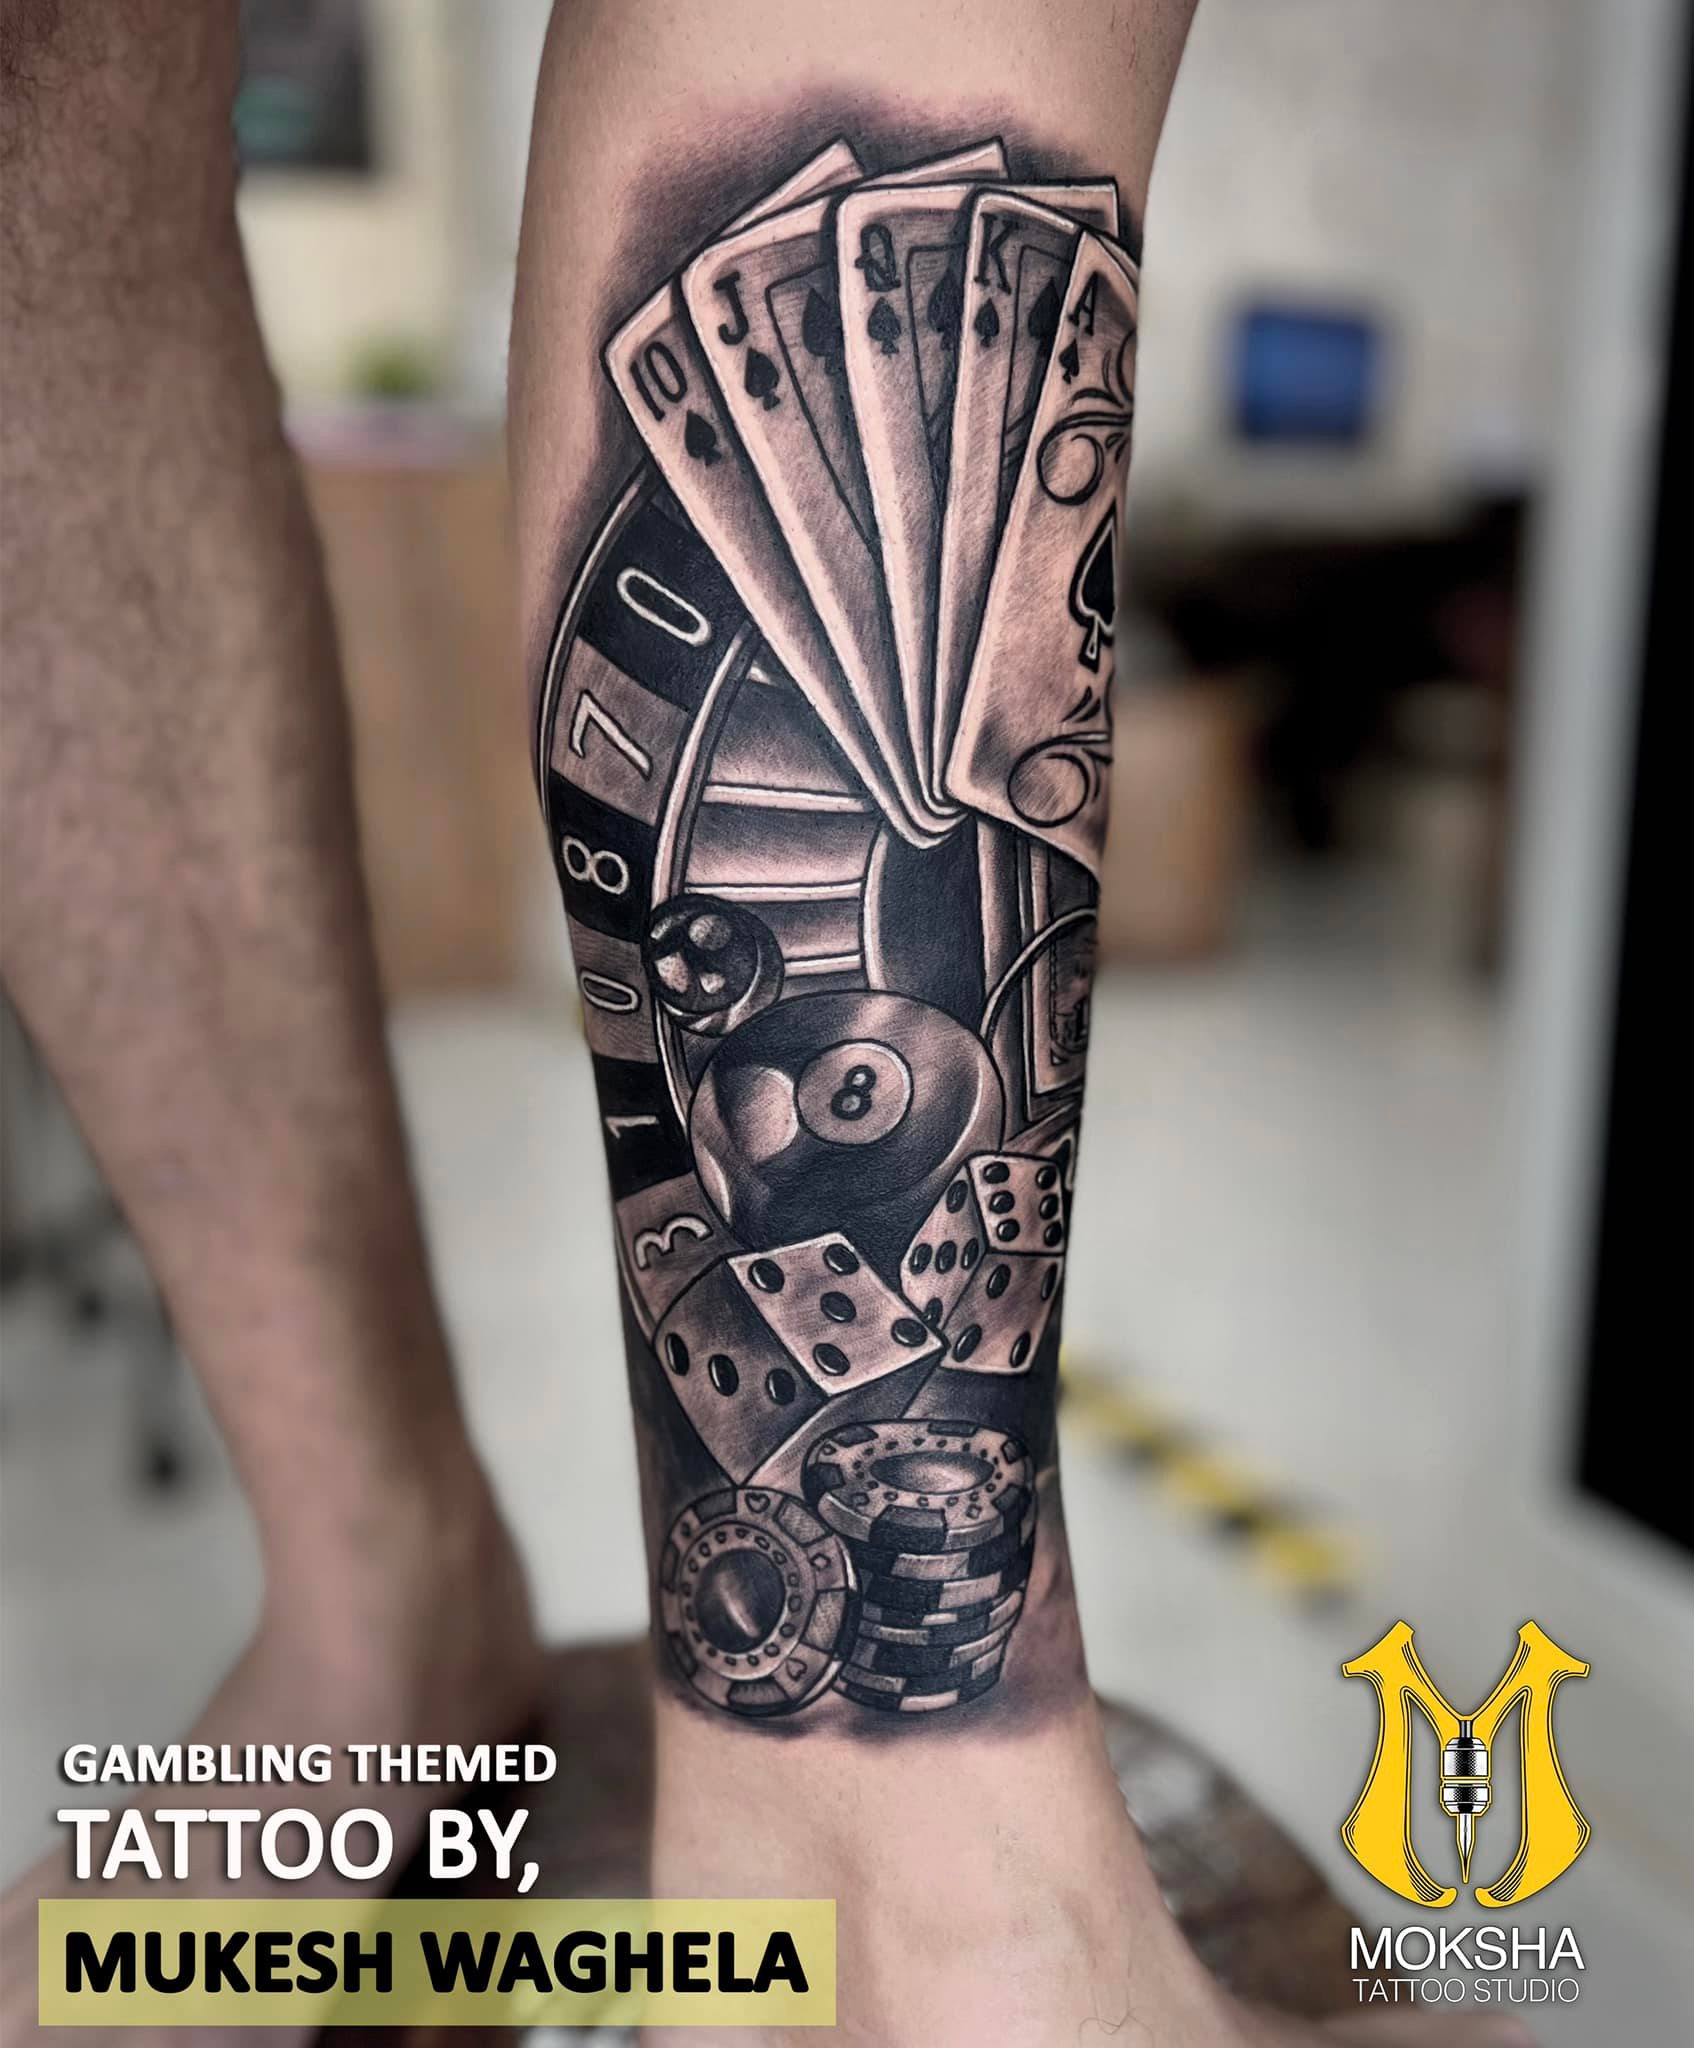 Best Tattoo Shop in Goa | Famous Tattoo Studio in India - Best tattoo Artist in Goa: Throughout the course of time